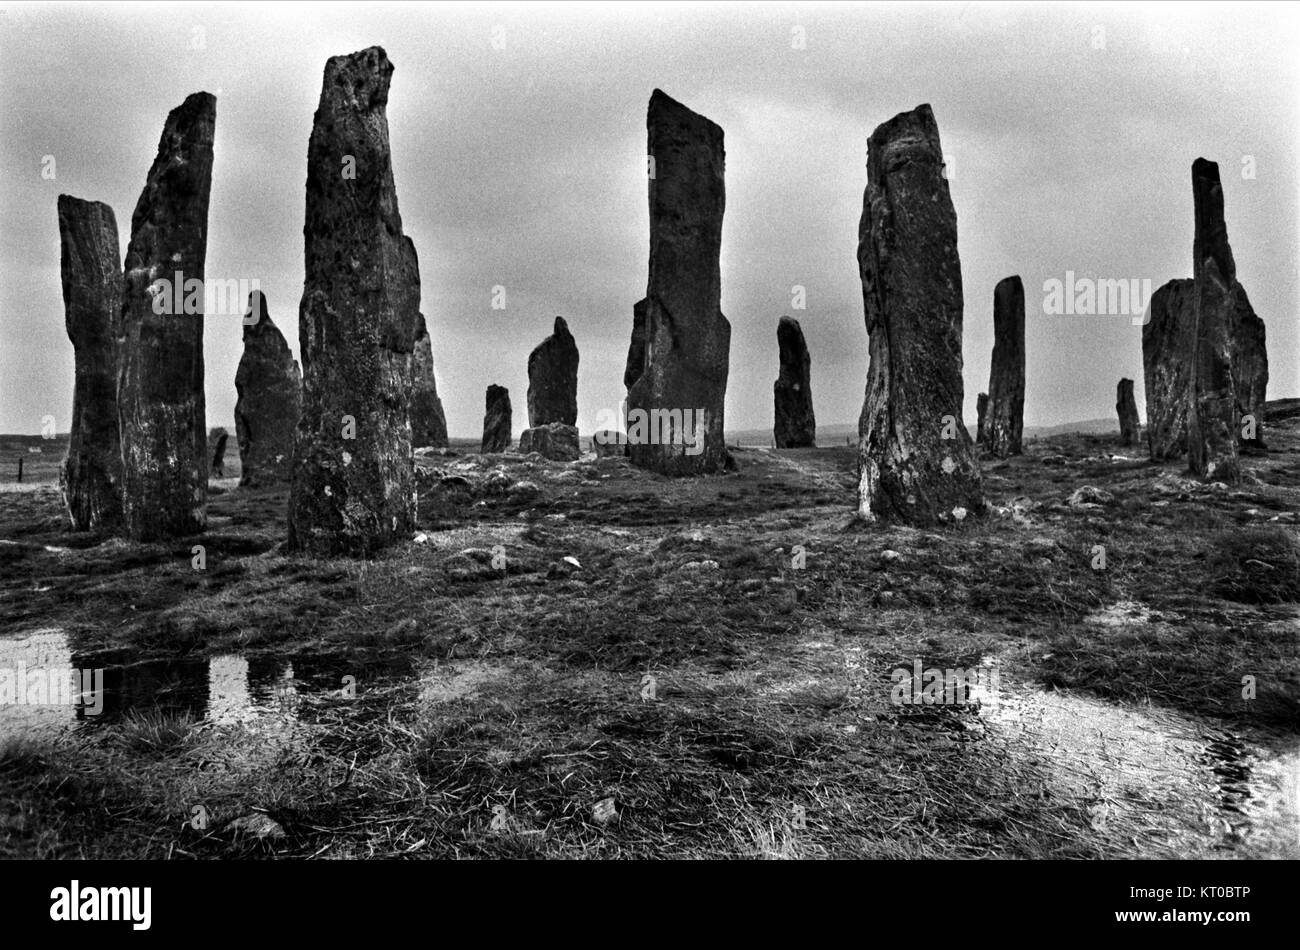 Callanish Standing Stones, Isle Of Lewis Outer Hebrides Highlands and Islands Scotland UK 1970 1974 HOMER SYKES Banque D'Images